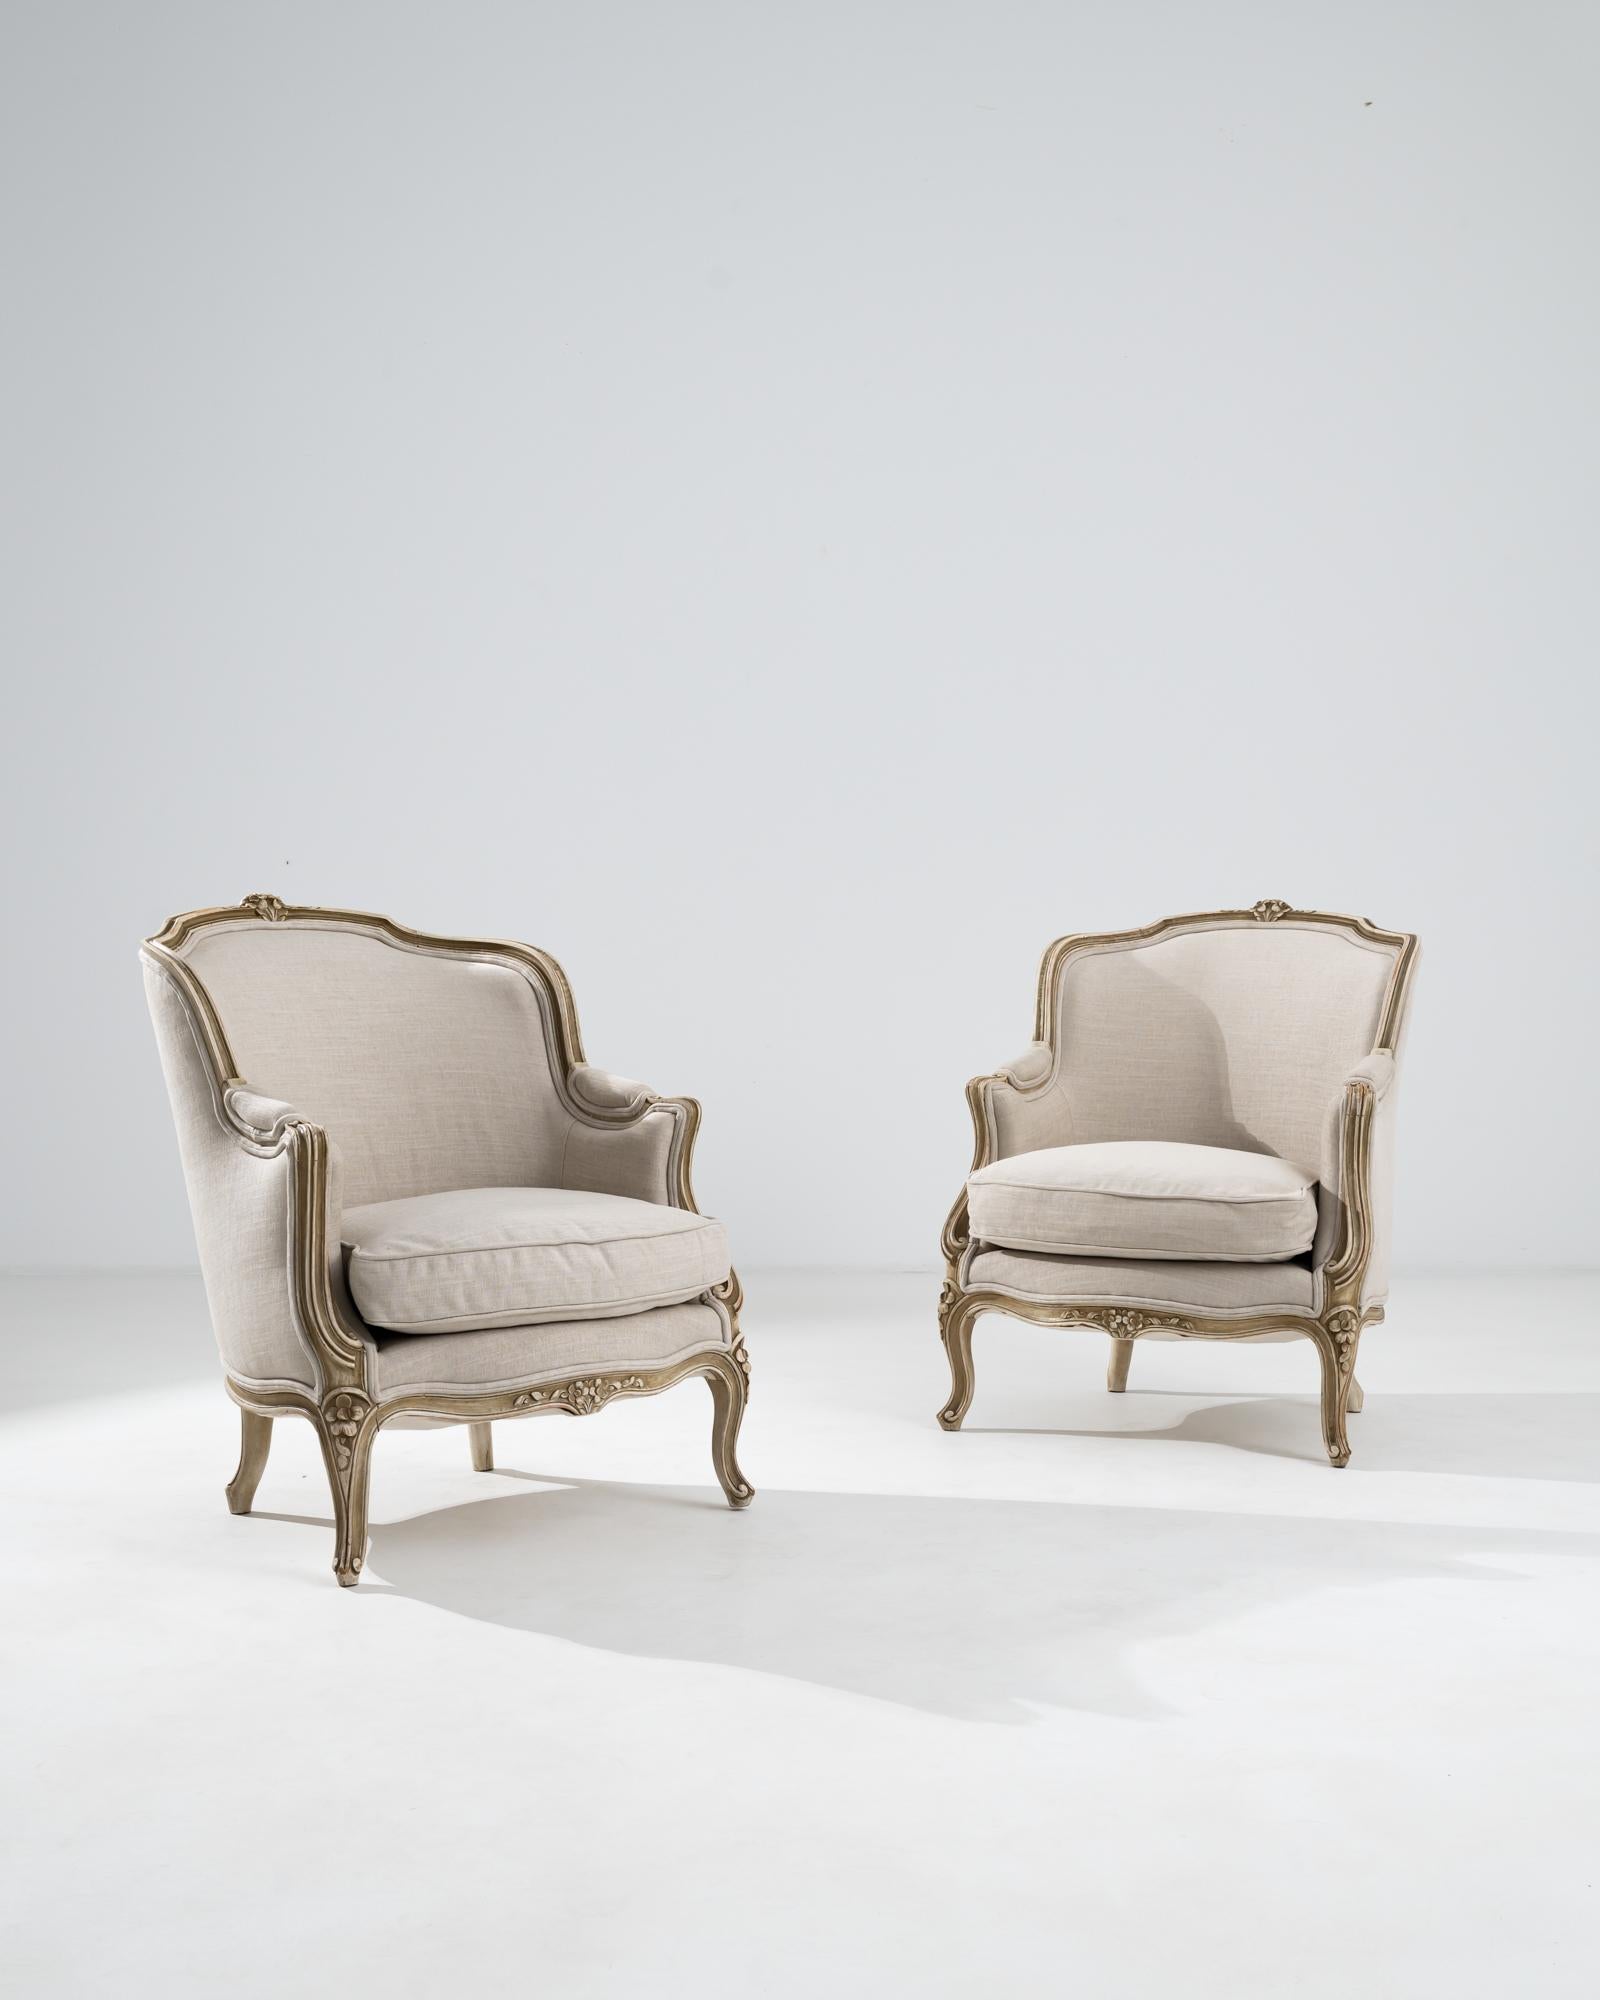 Made in France, circa 1900, this pair of wooden armchairs features a stately profile, with wide seats and upholstery that wraps generously around the chair’s back, reflecting the refined comfort of the French Provincial style. Contoured armrests,